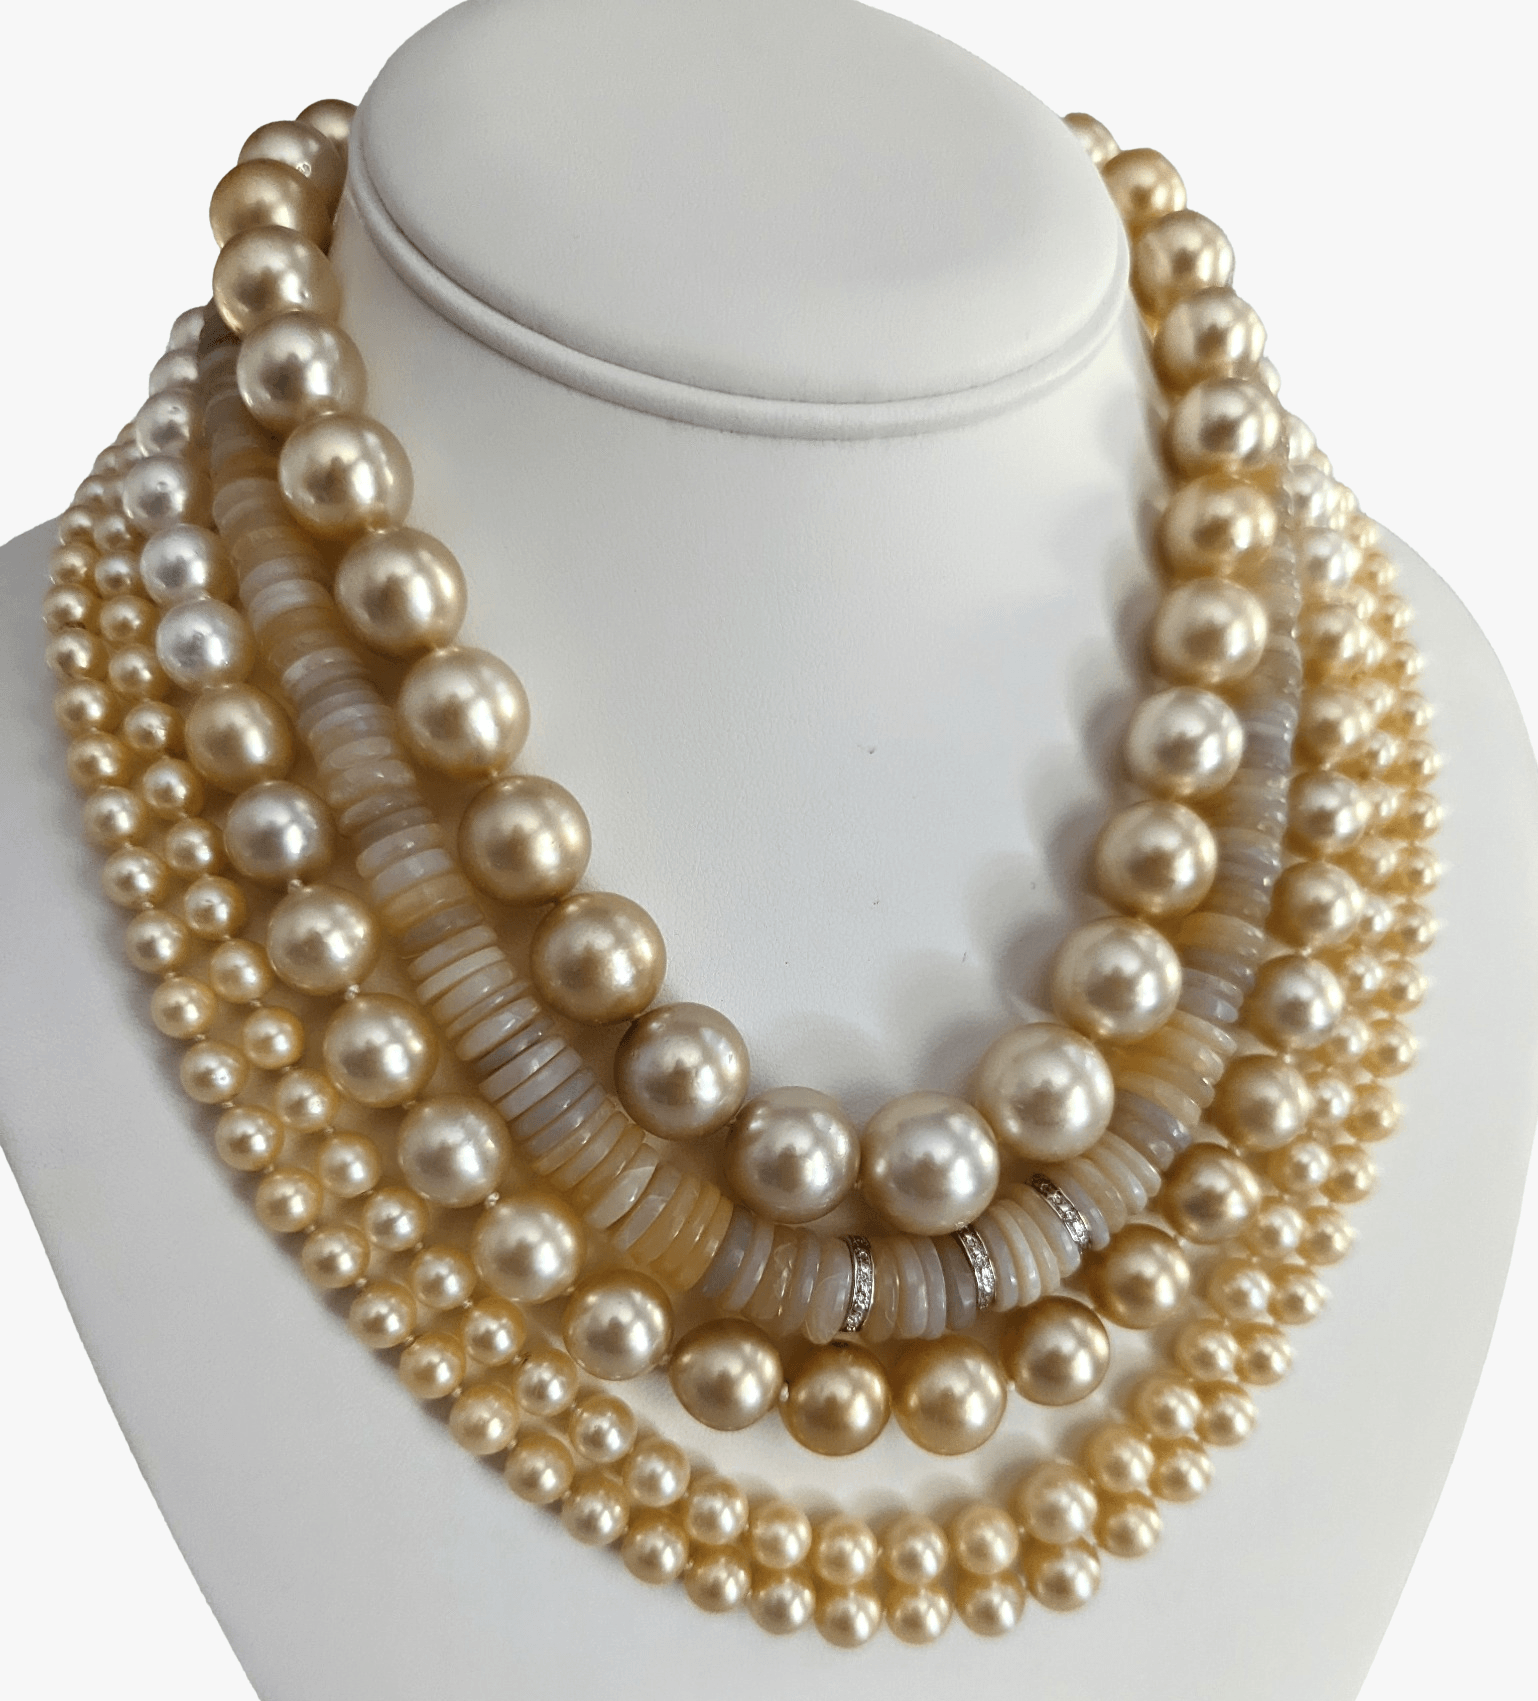 12-14mm GORGEOUS! Golden South Sea Pearl Necklace - Marina Korneev Fine Pearls